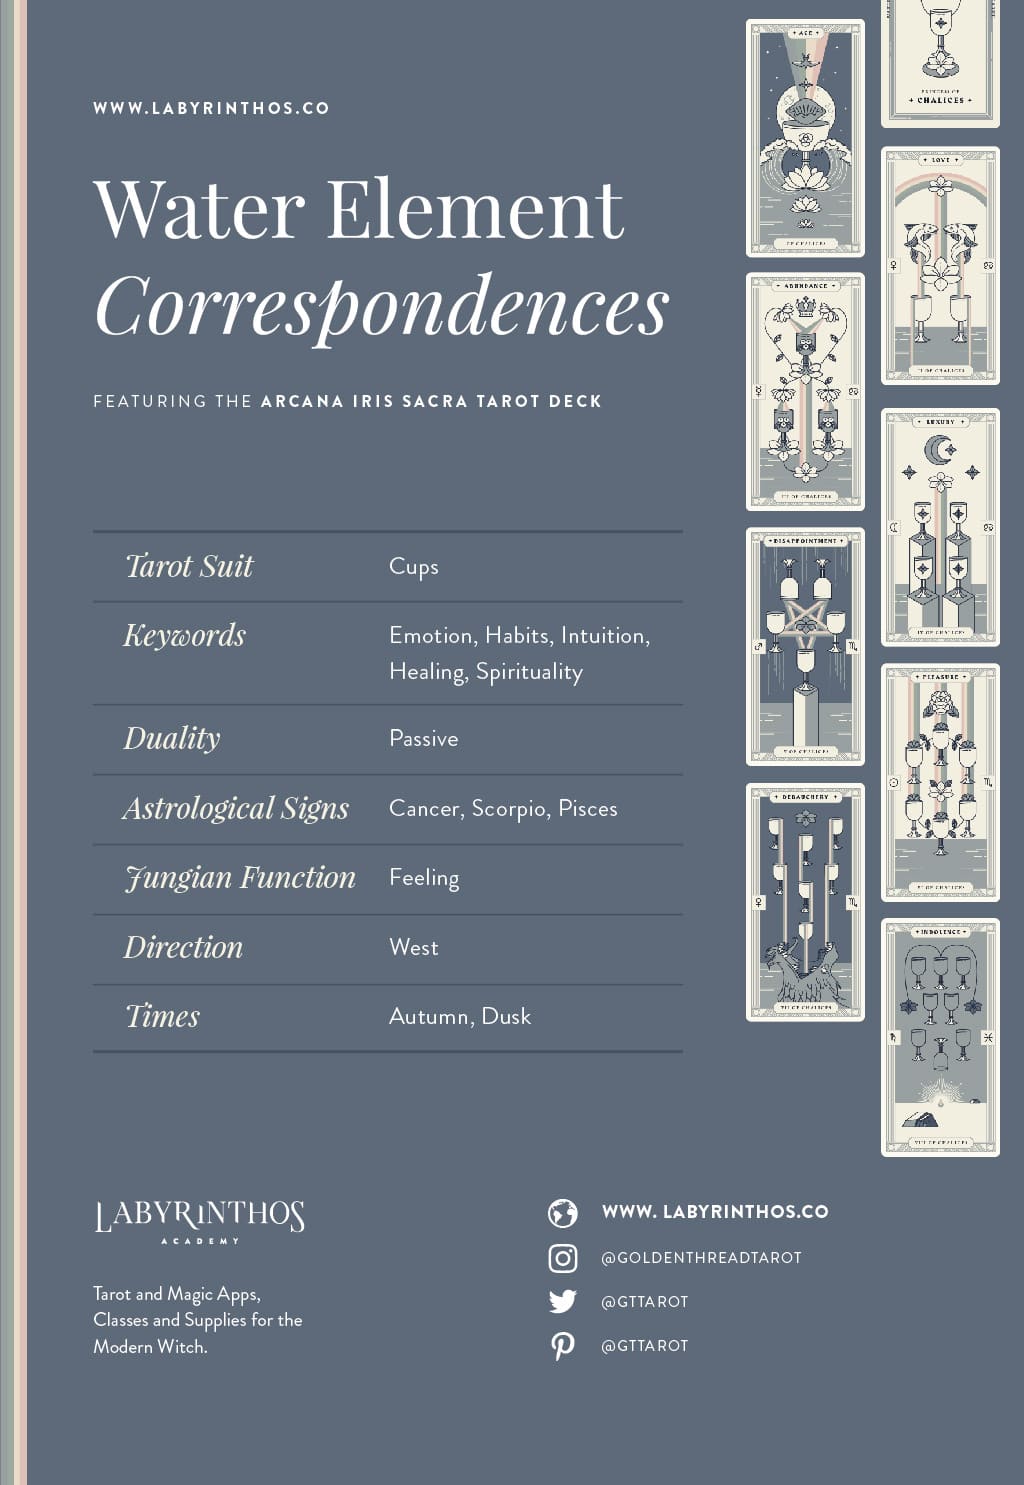 Water element correspondences - suit of cups tarot card meanings